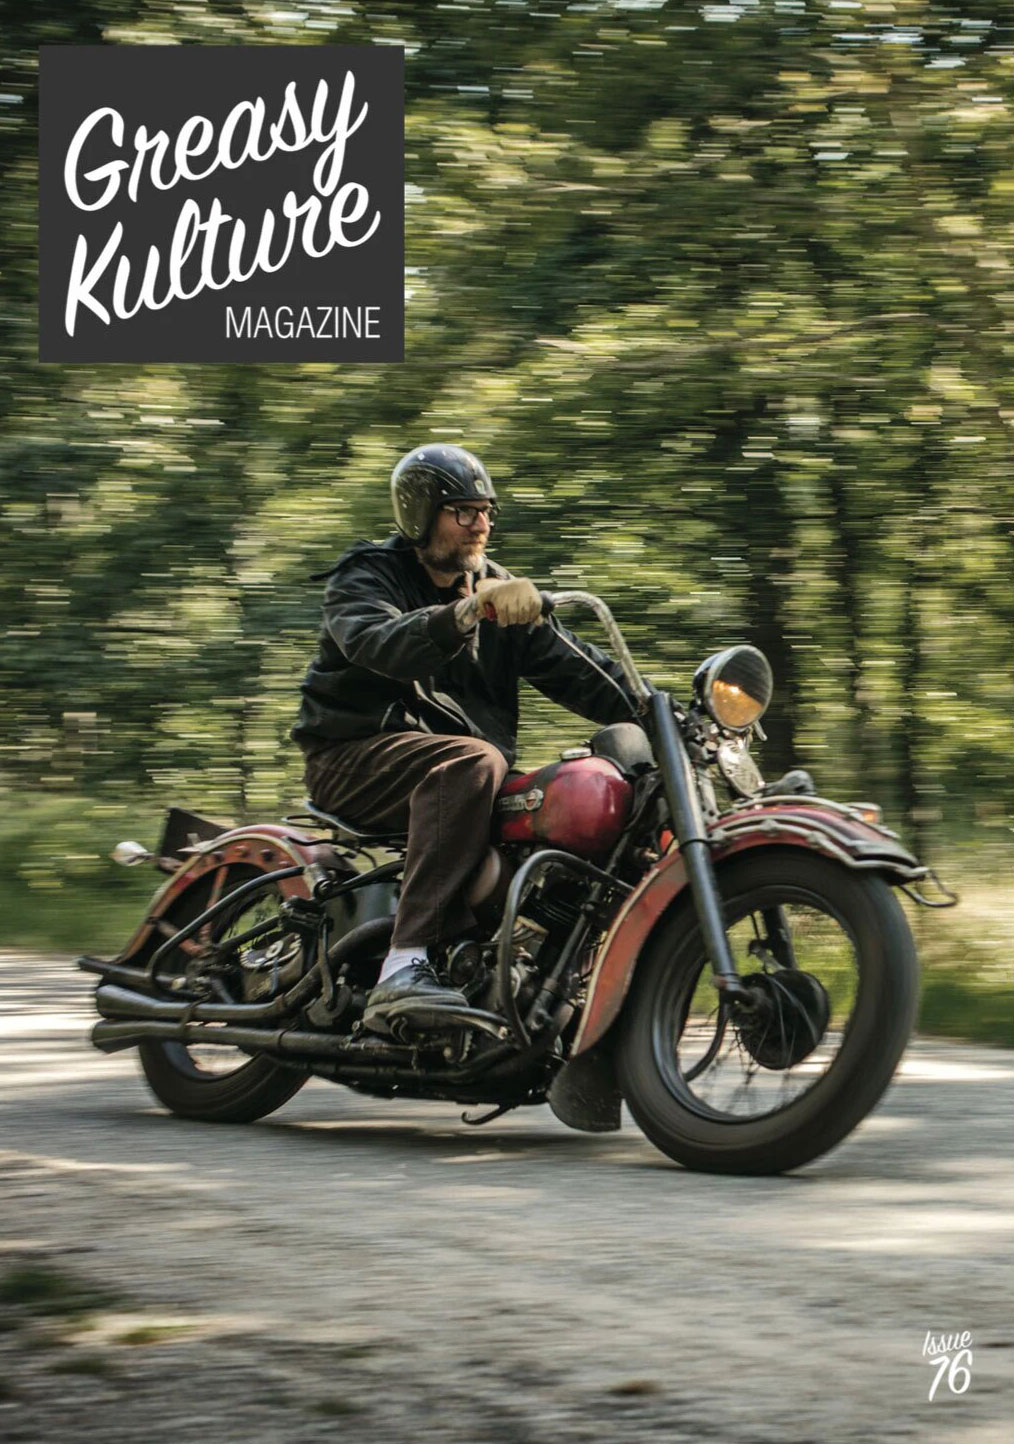 Greasy Kulture Issue 76